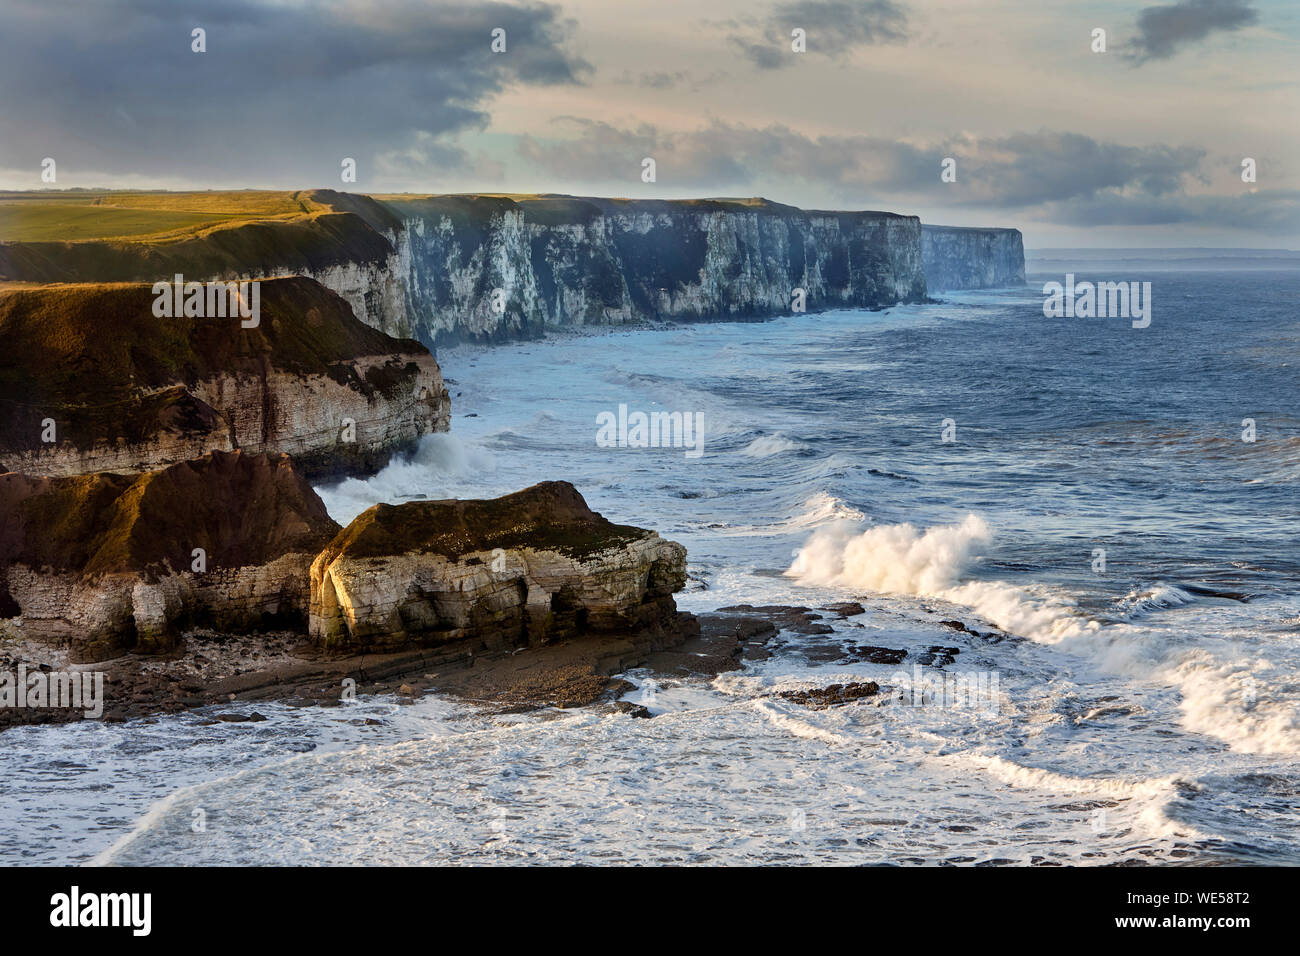 The view of Bempton Cliffs from Thornwick Bay, Flamborough Head, East Yorkshire, UK. Stock Photo